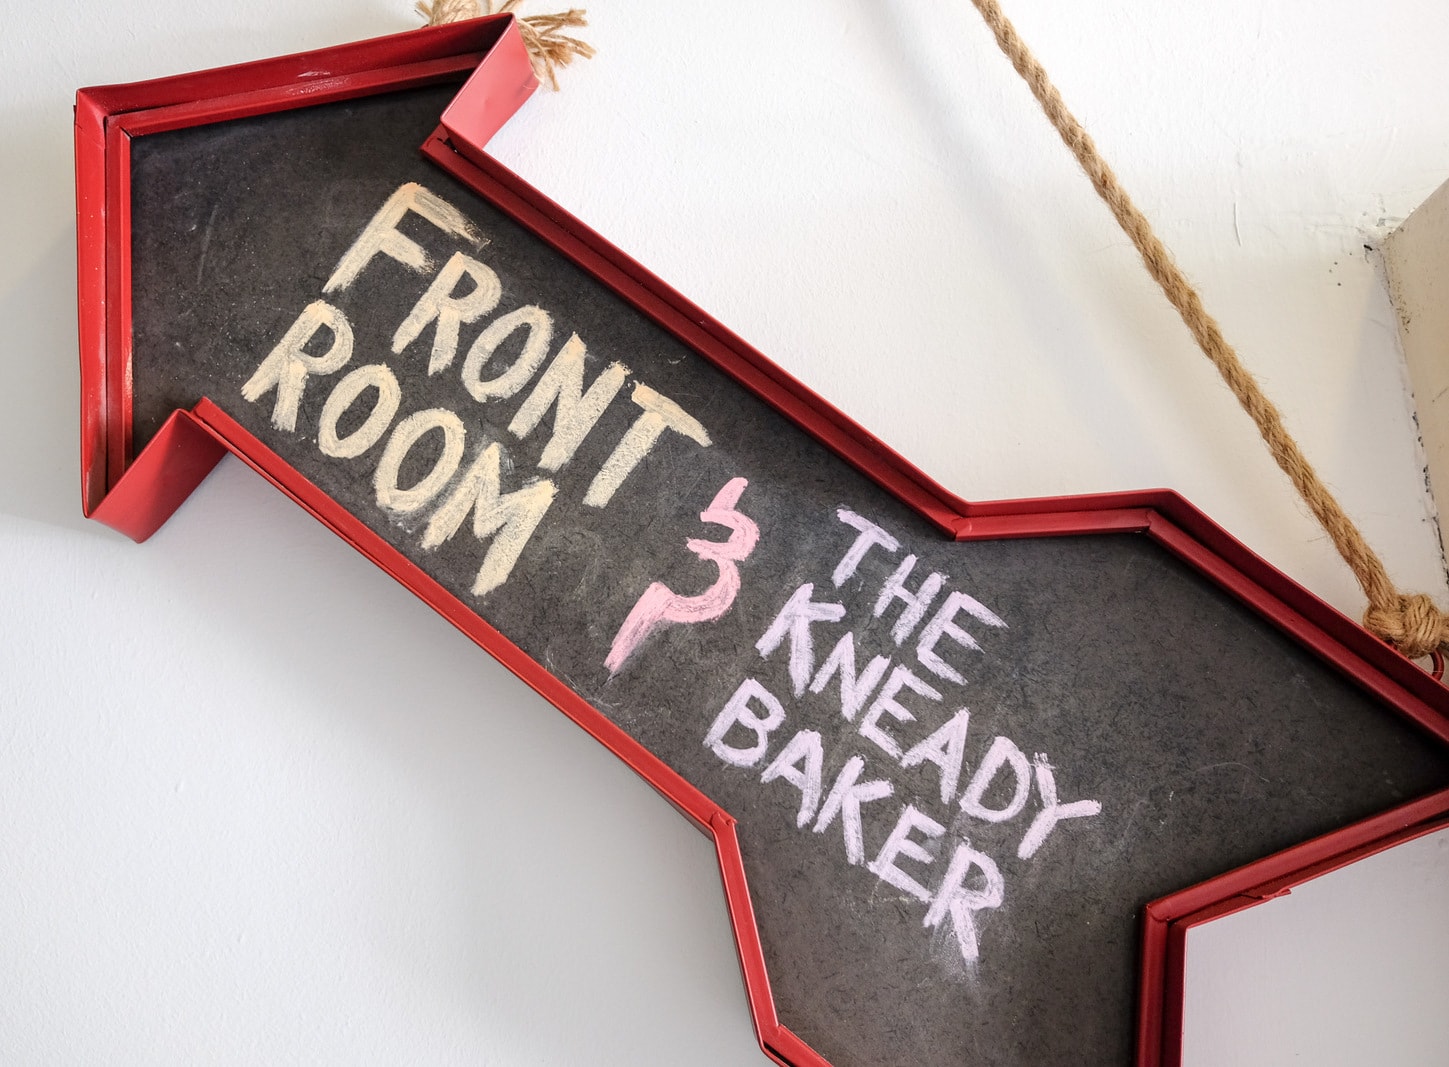 & the baker kneady front room Cafes